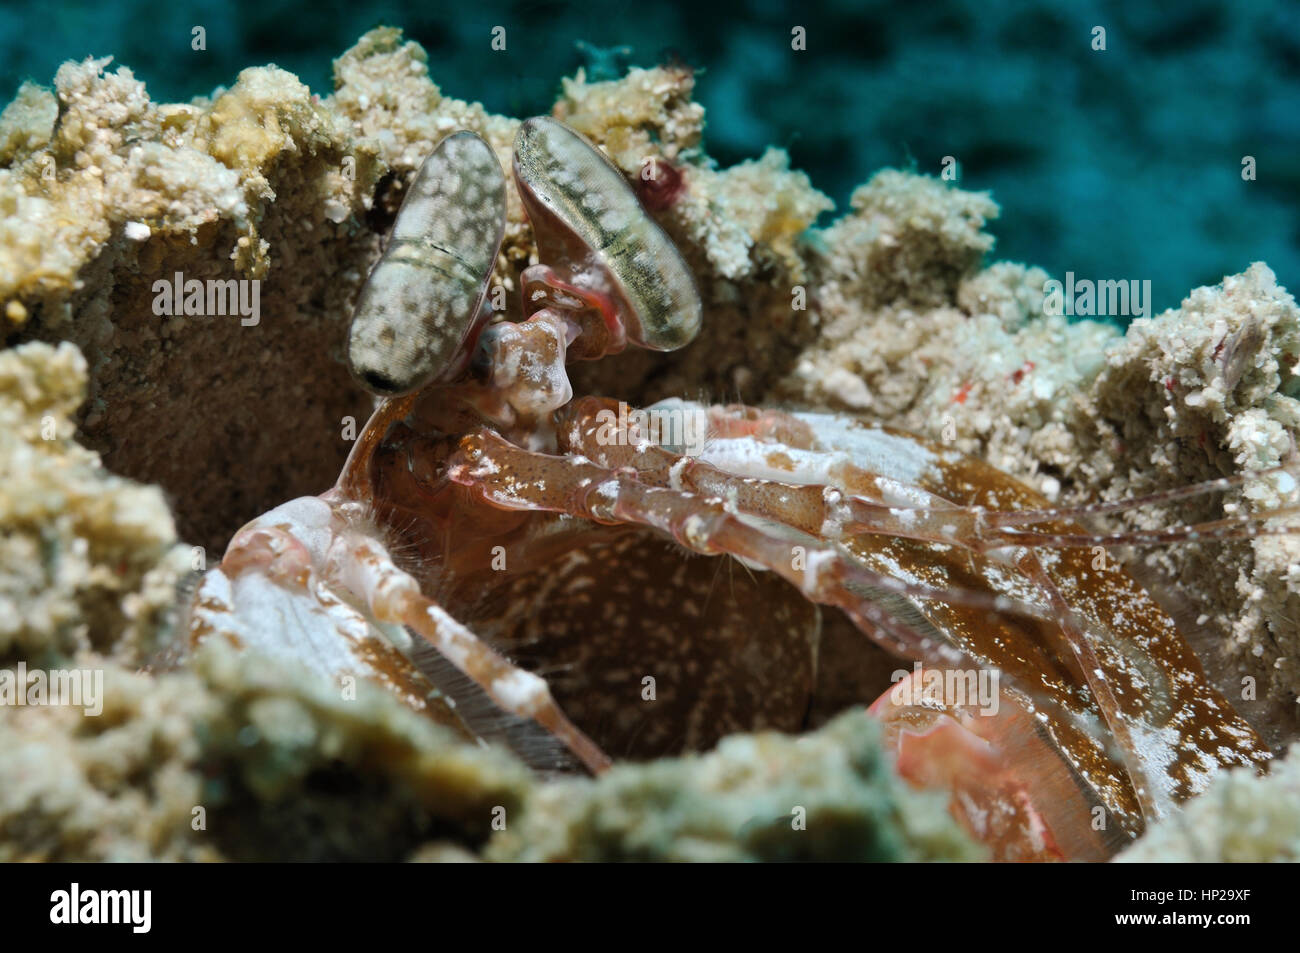 Tiger mantis shrimp is piping out from its burrow, Panglao, Philippines Stock Photo